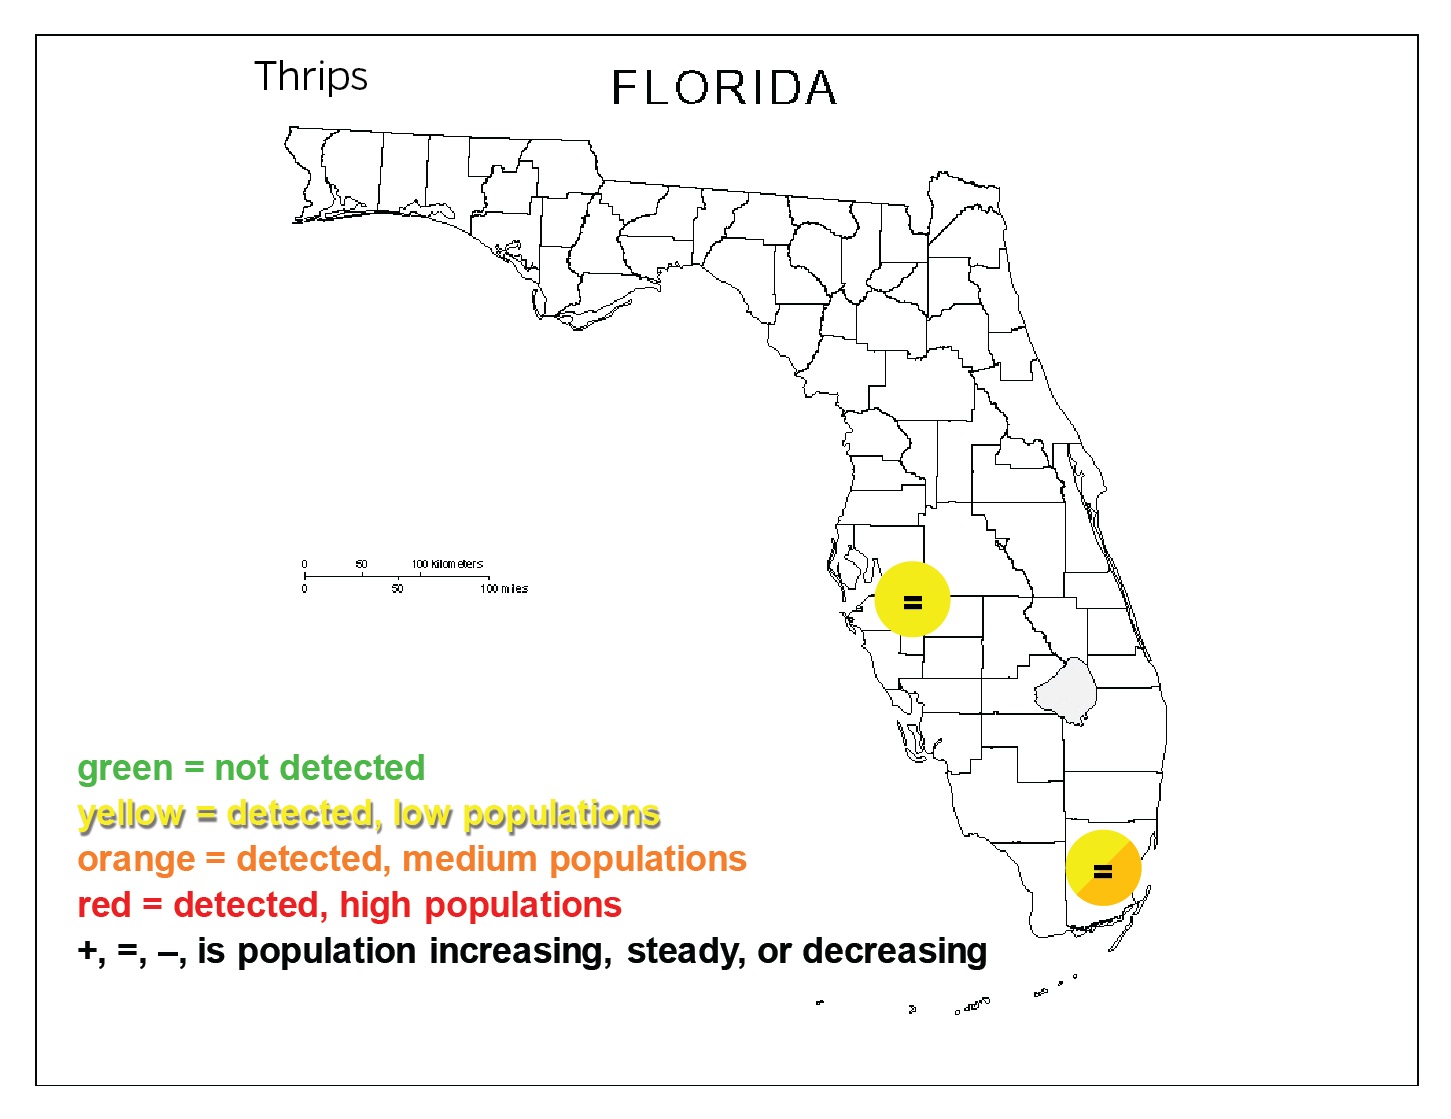 Featured image for “Thrips Update: Populations Vary in Central, Southern Florida”